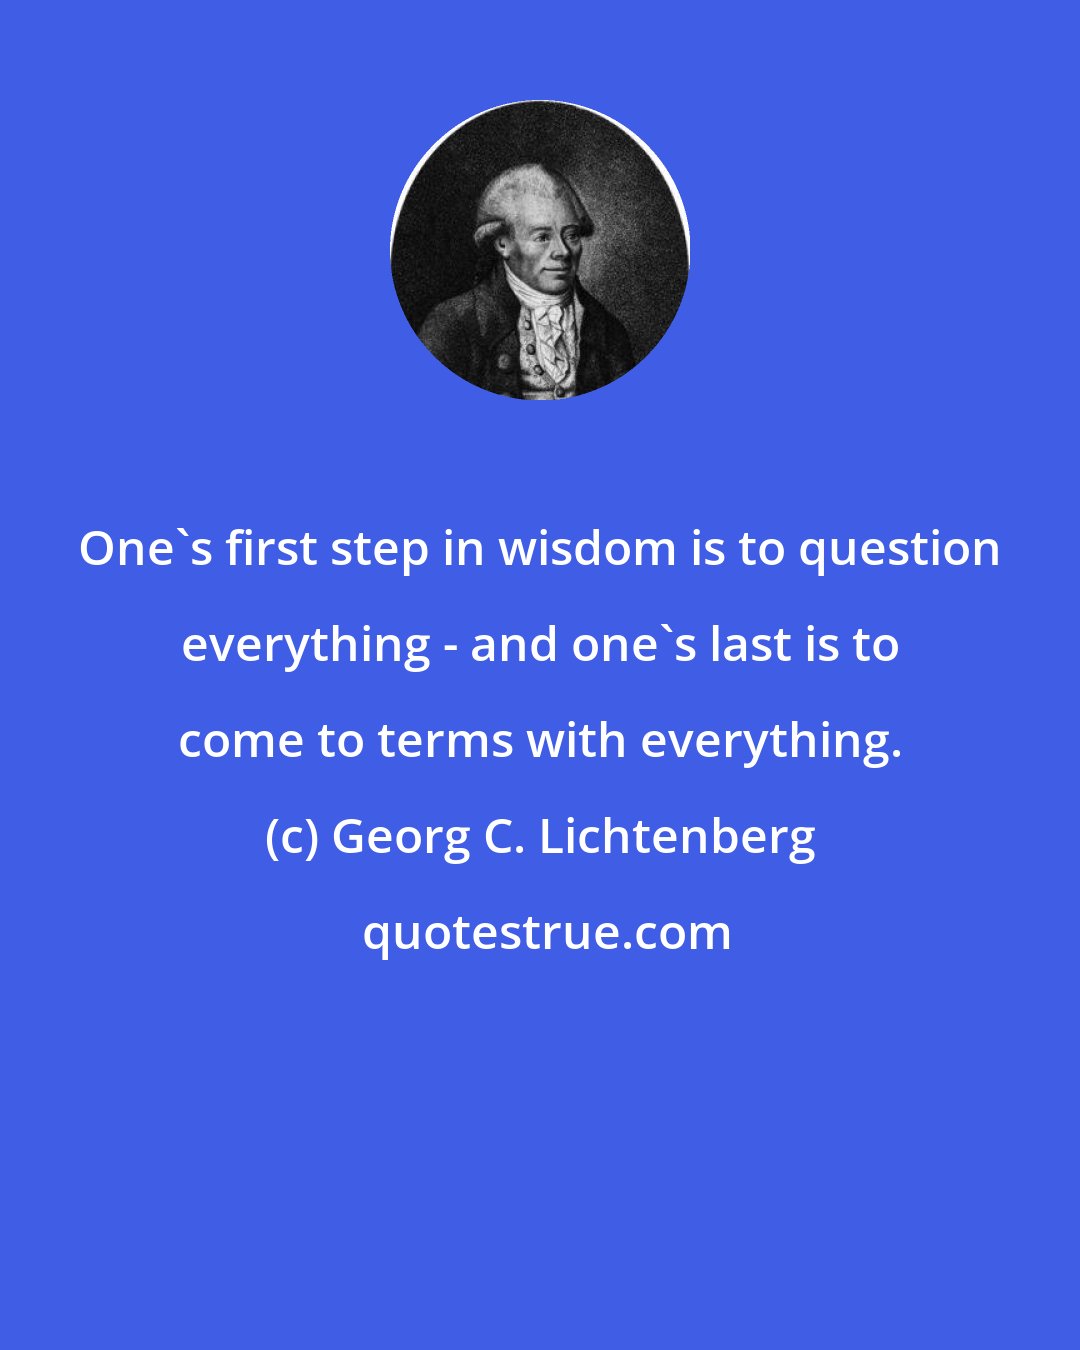 Georg C. Lichtenberg: One's first step in wisdom is to question everything - and one's last is to come to terms with everything.